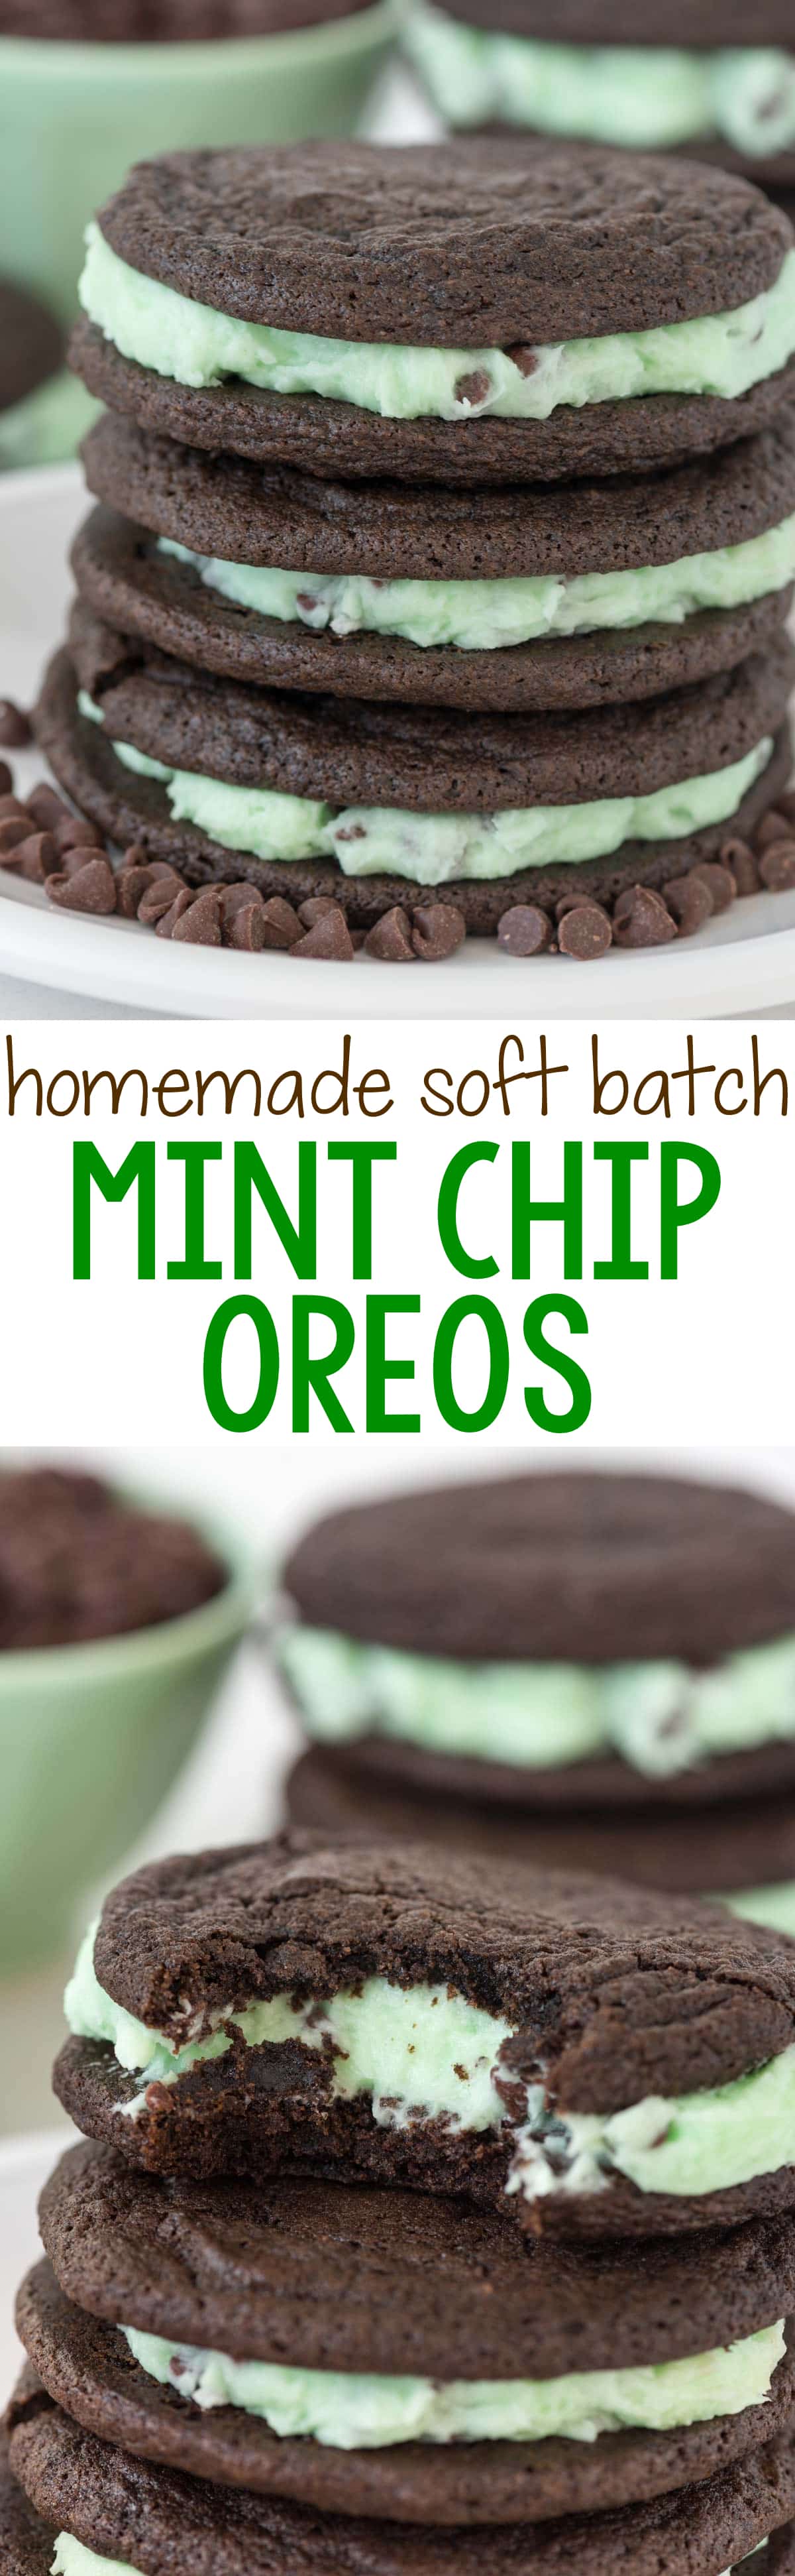 Soft Batch Mint Chip Oreos - this EASY homemade Oreo recipe is soft batch and filled with mint chip filling! Mint lovers will LOVE this cookie recipe.